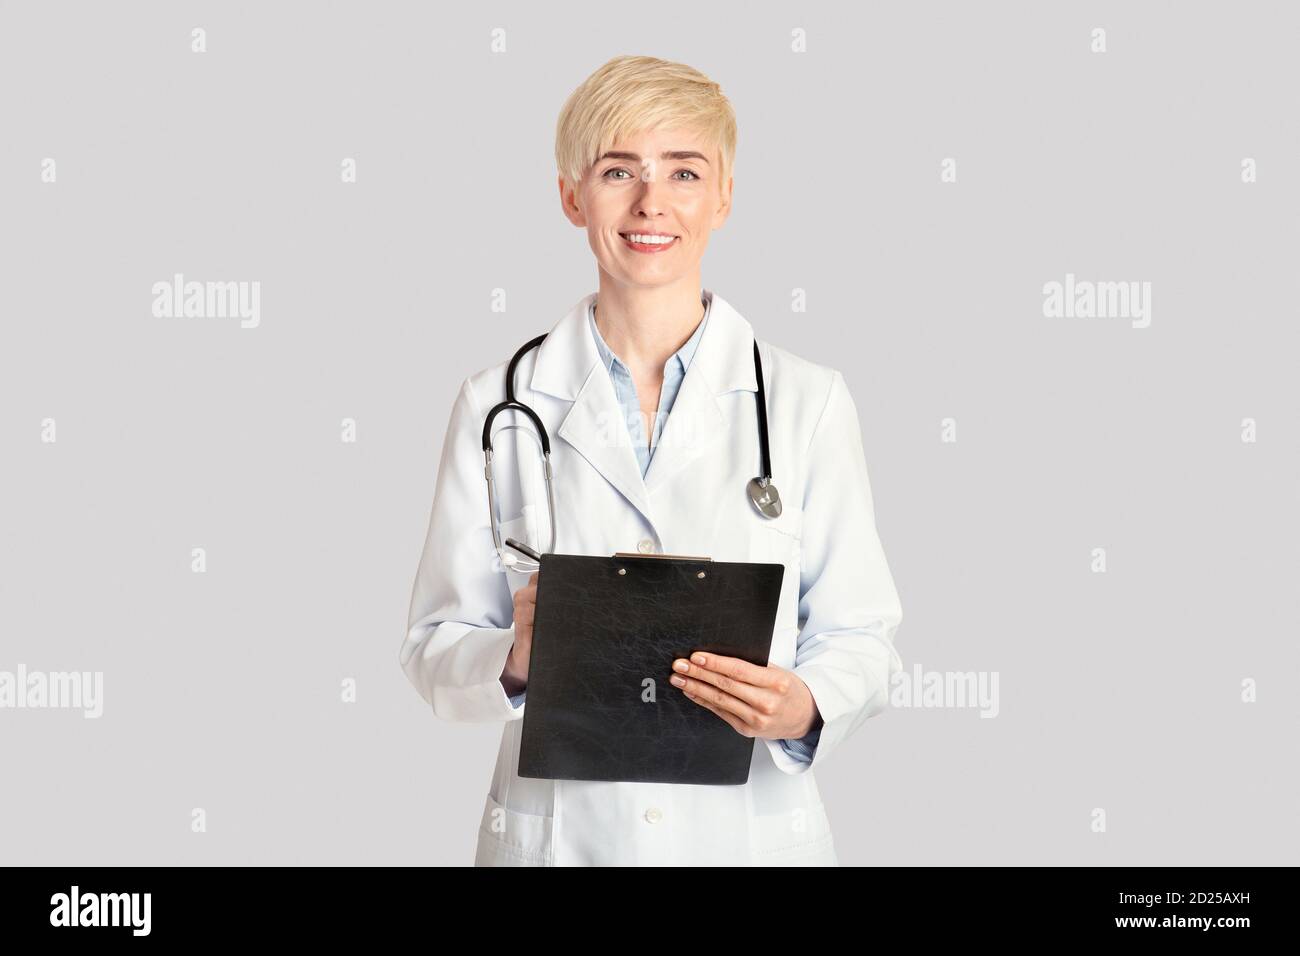 Medical professions, healthcare and prevention concept. Smiling adult woman making notes in tablet Stock Photo